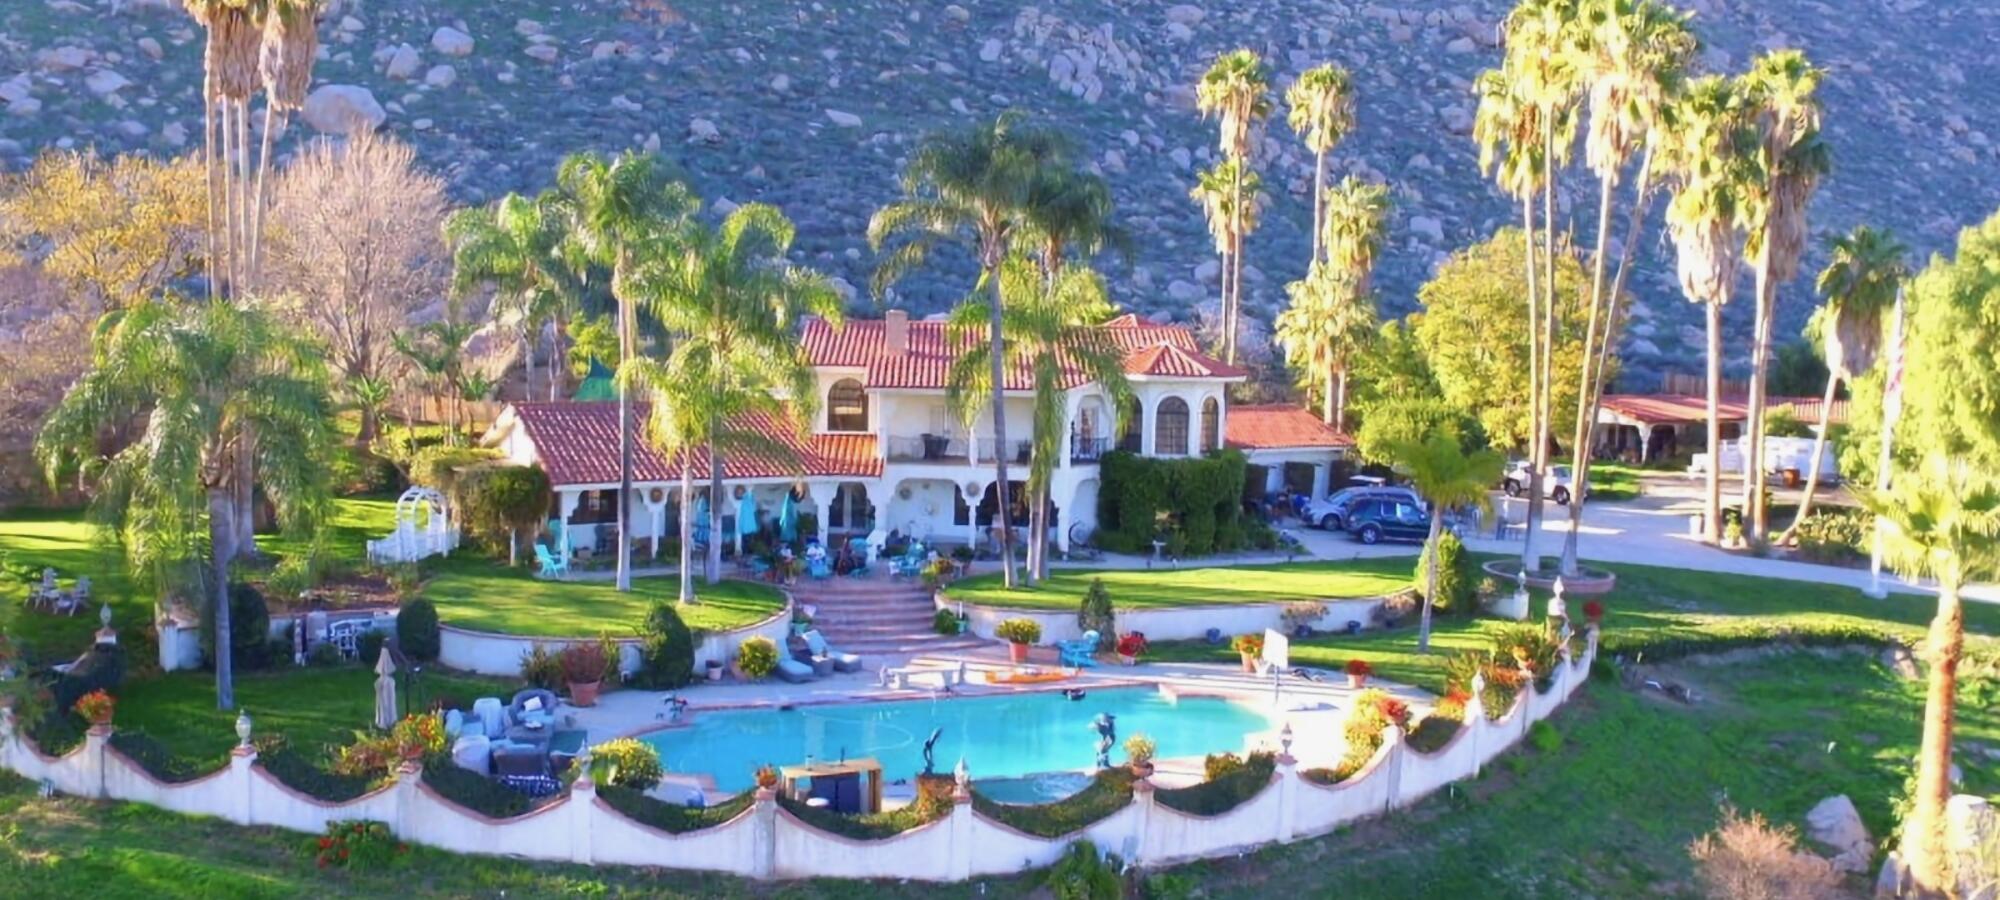 Noland's Hemet home includes a swimming pool, yard and room for her exotic animals.